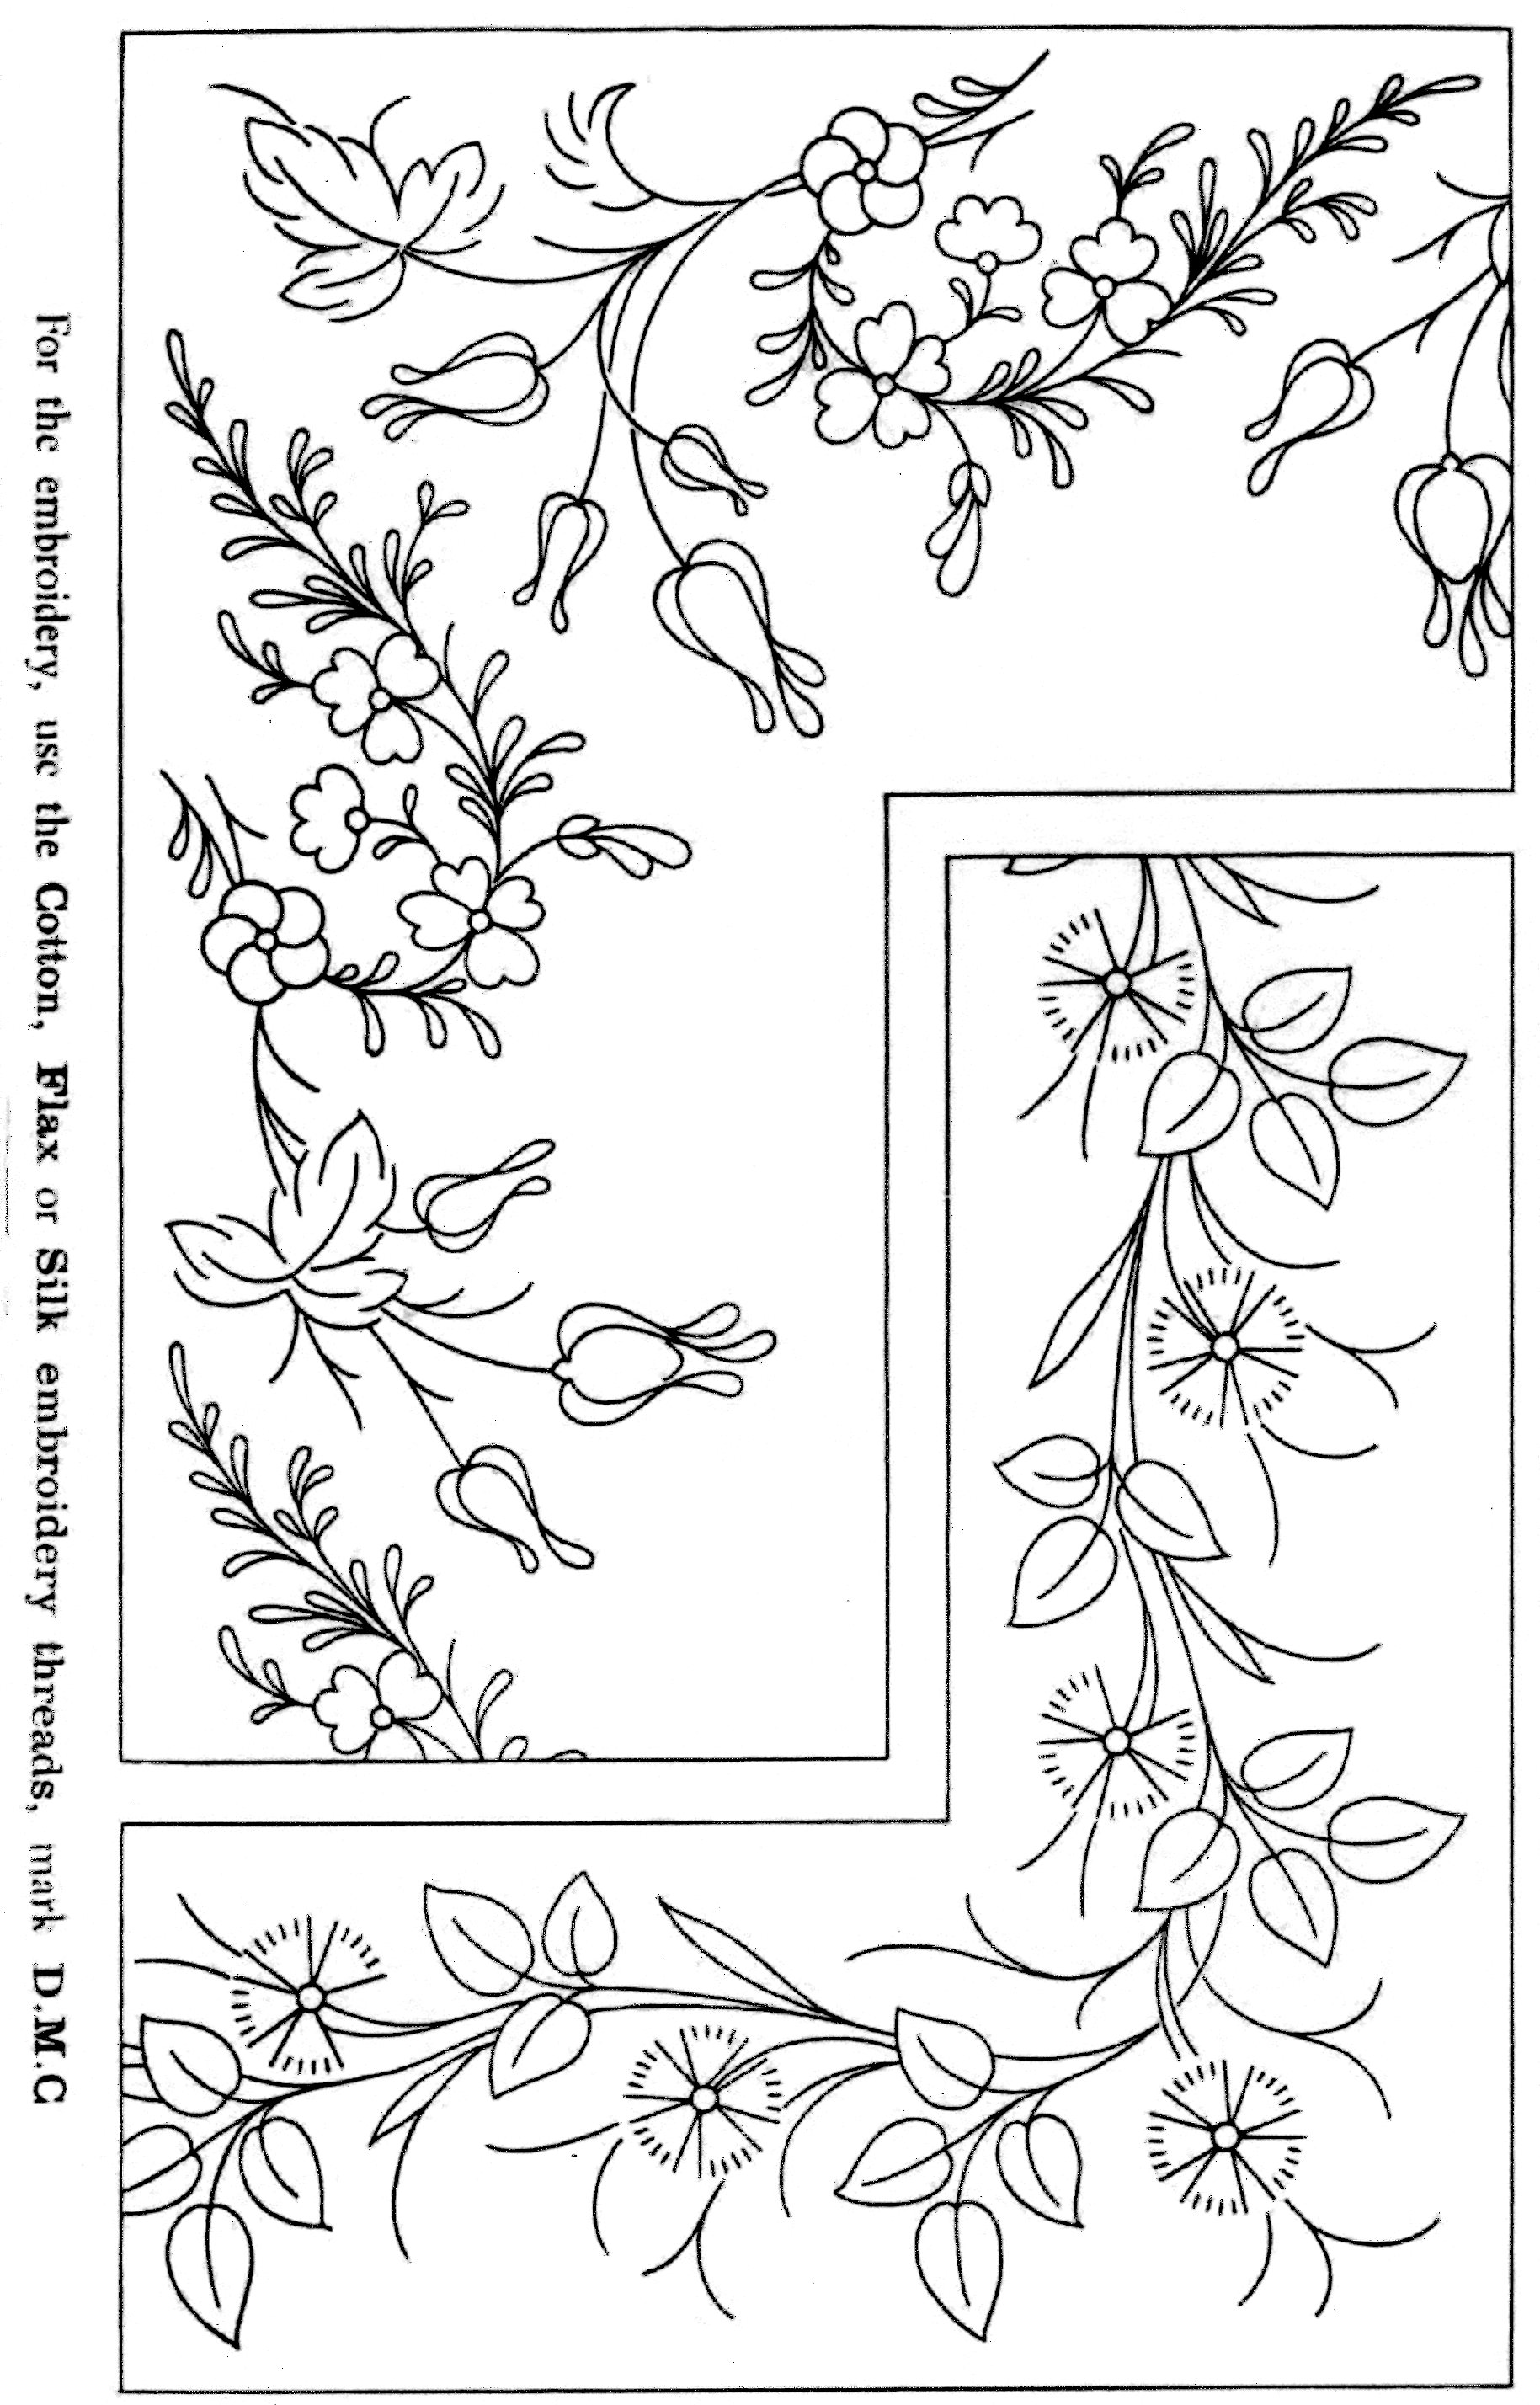 free vintage embroidery patterns